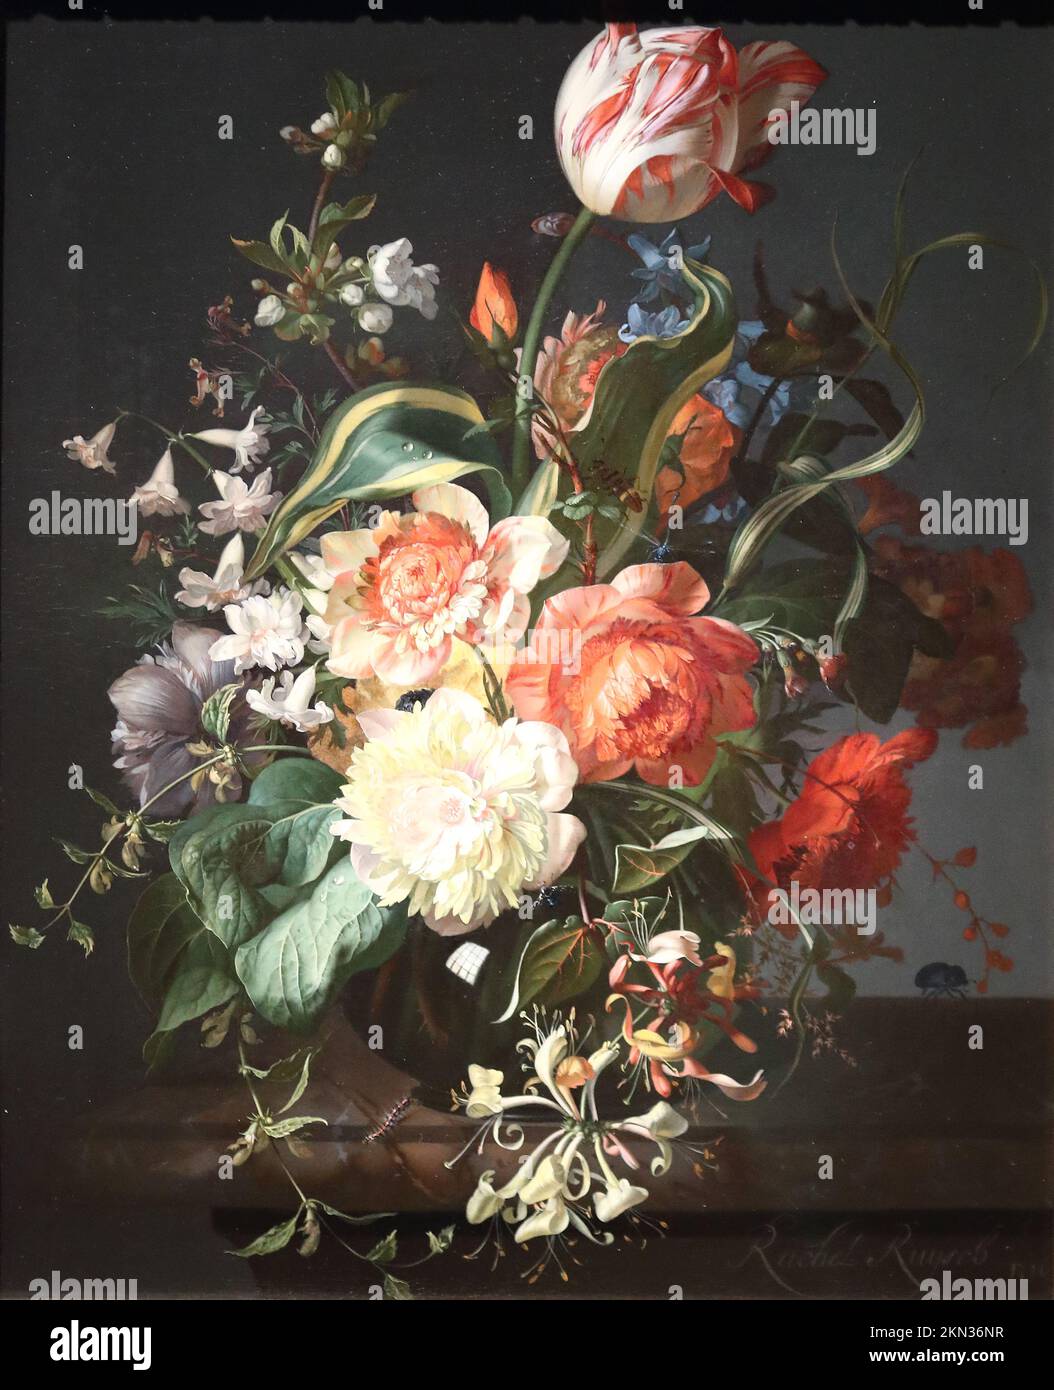 Flowers in a Glass Vase with a Tulip by Dutch Golden Age painter Rachel Ruysch at the National Gallery, London, UK Stock Photo